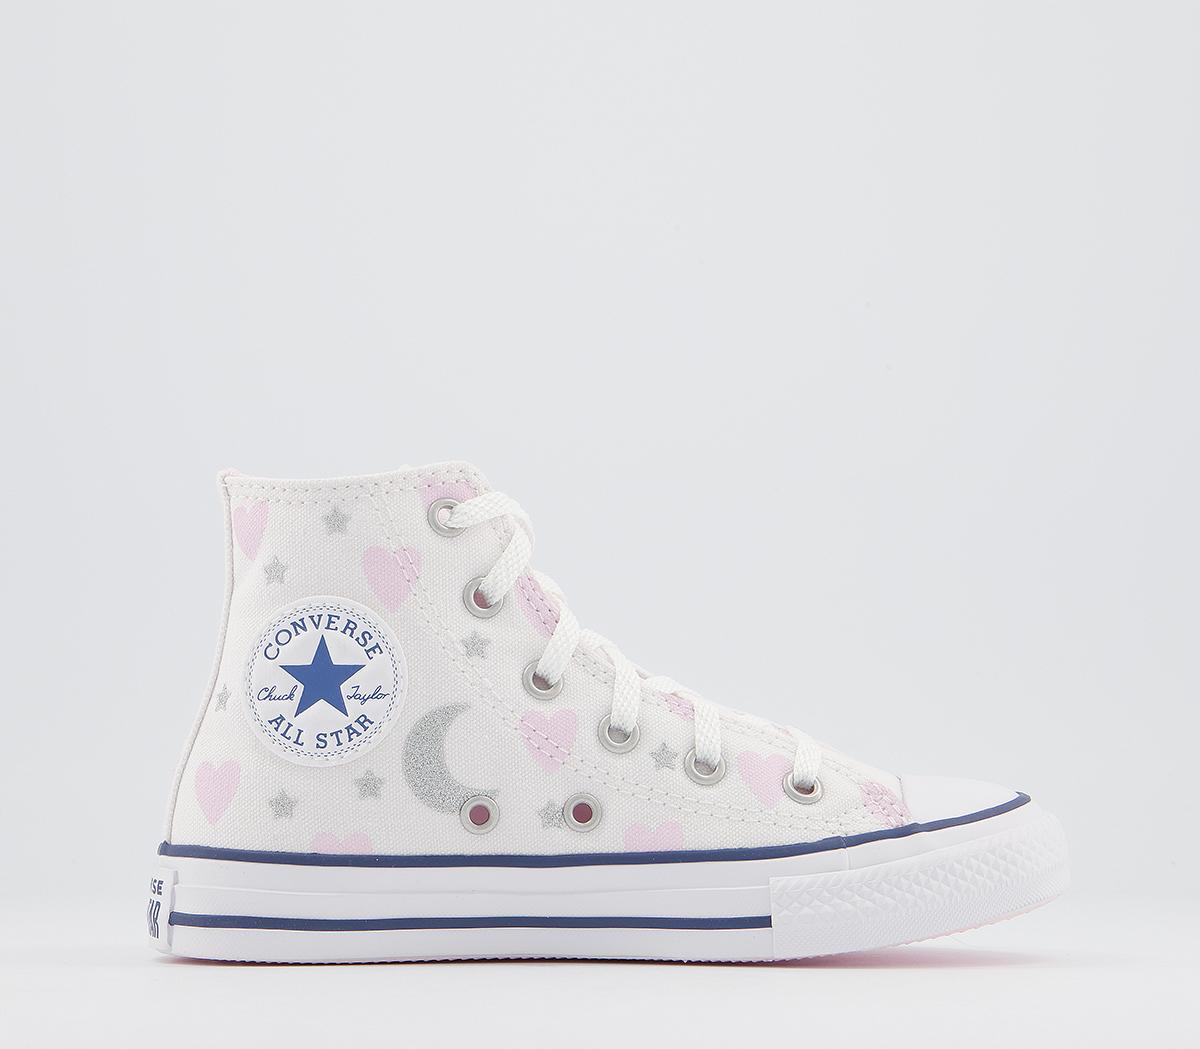 ConverseAll Star Hi Youth TrainersWhite Black Bold Pink Heart Moon